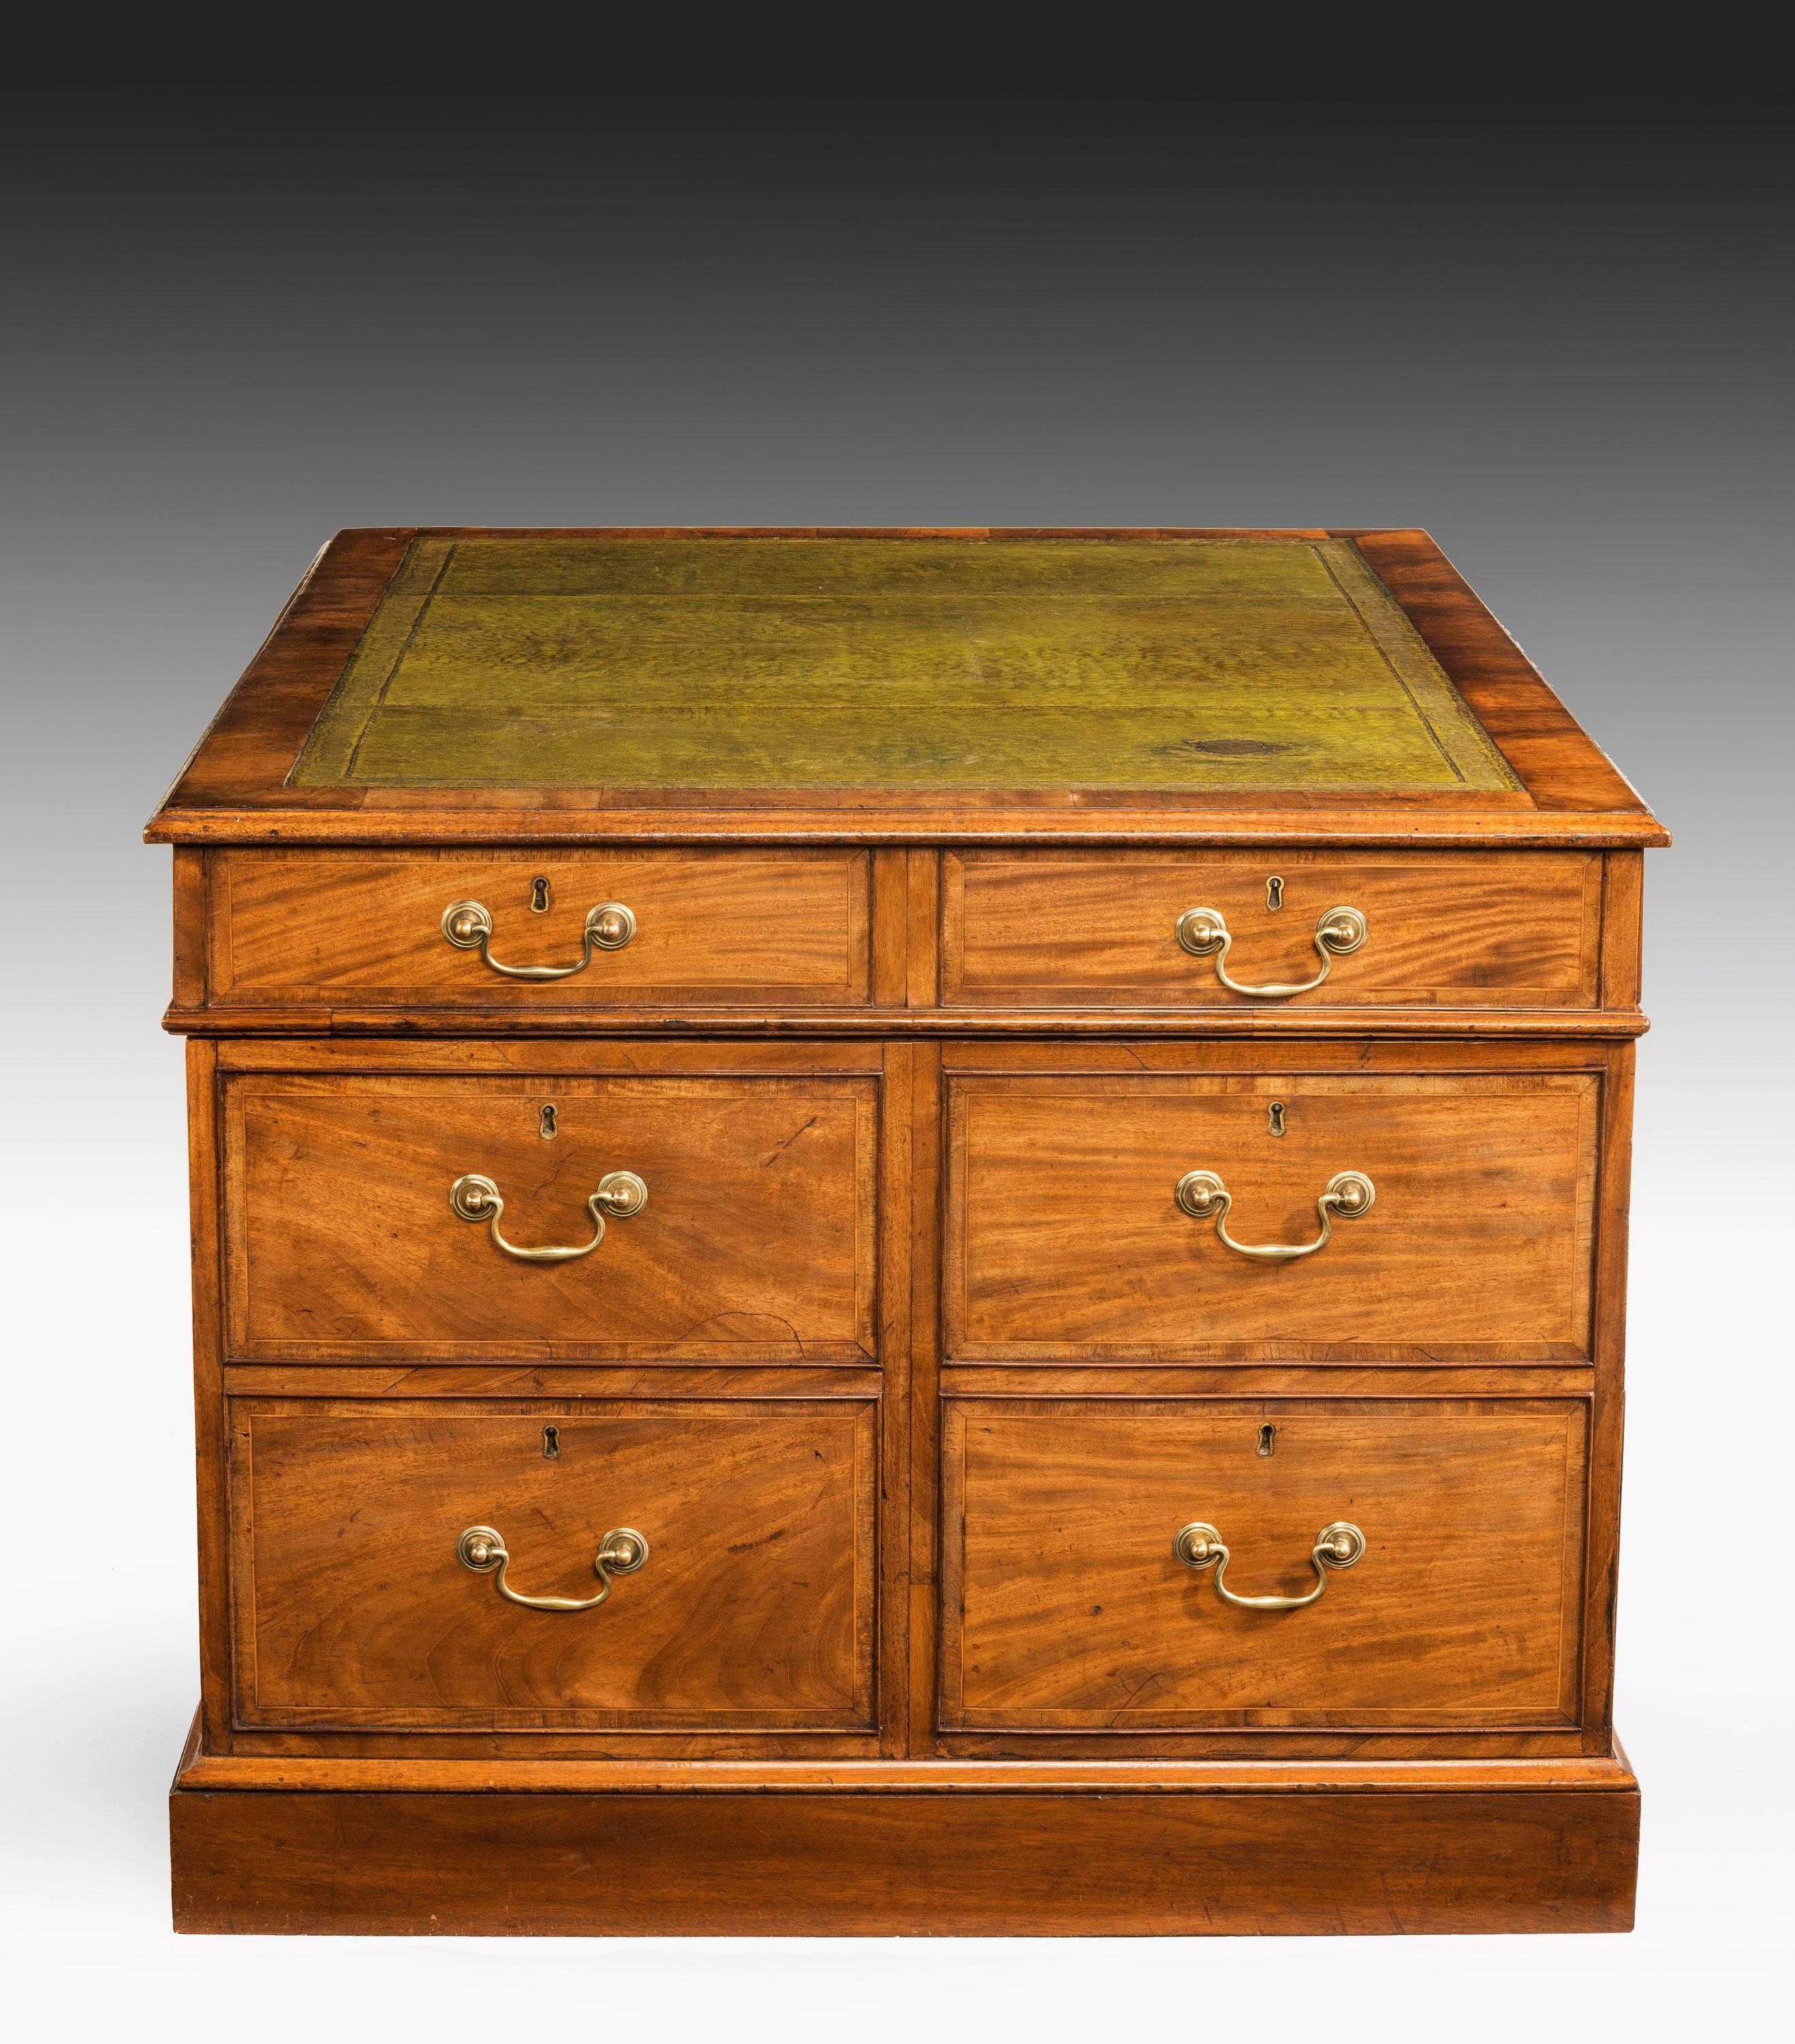 English Chippendale Period Mahogany Partners Desk in Three Sections